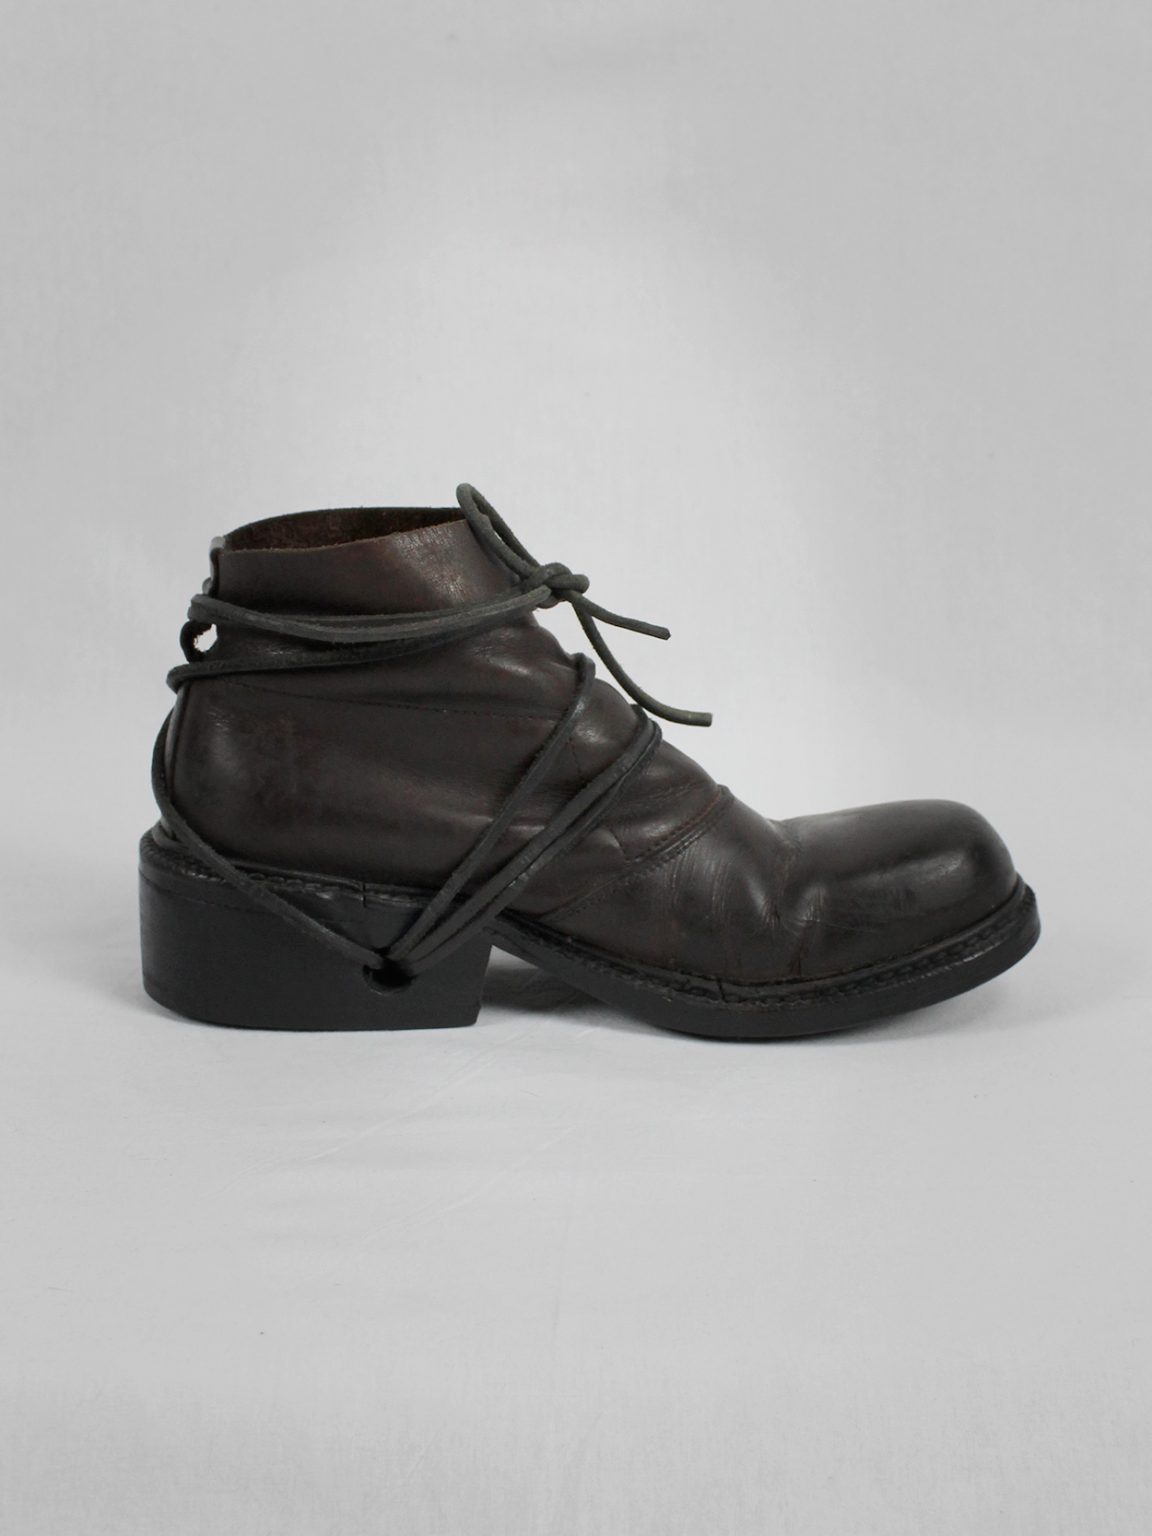 Dirk Bikkembergs brown boots with flap and laces through the soles (39) — late 90's